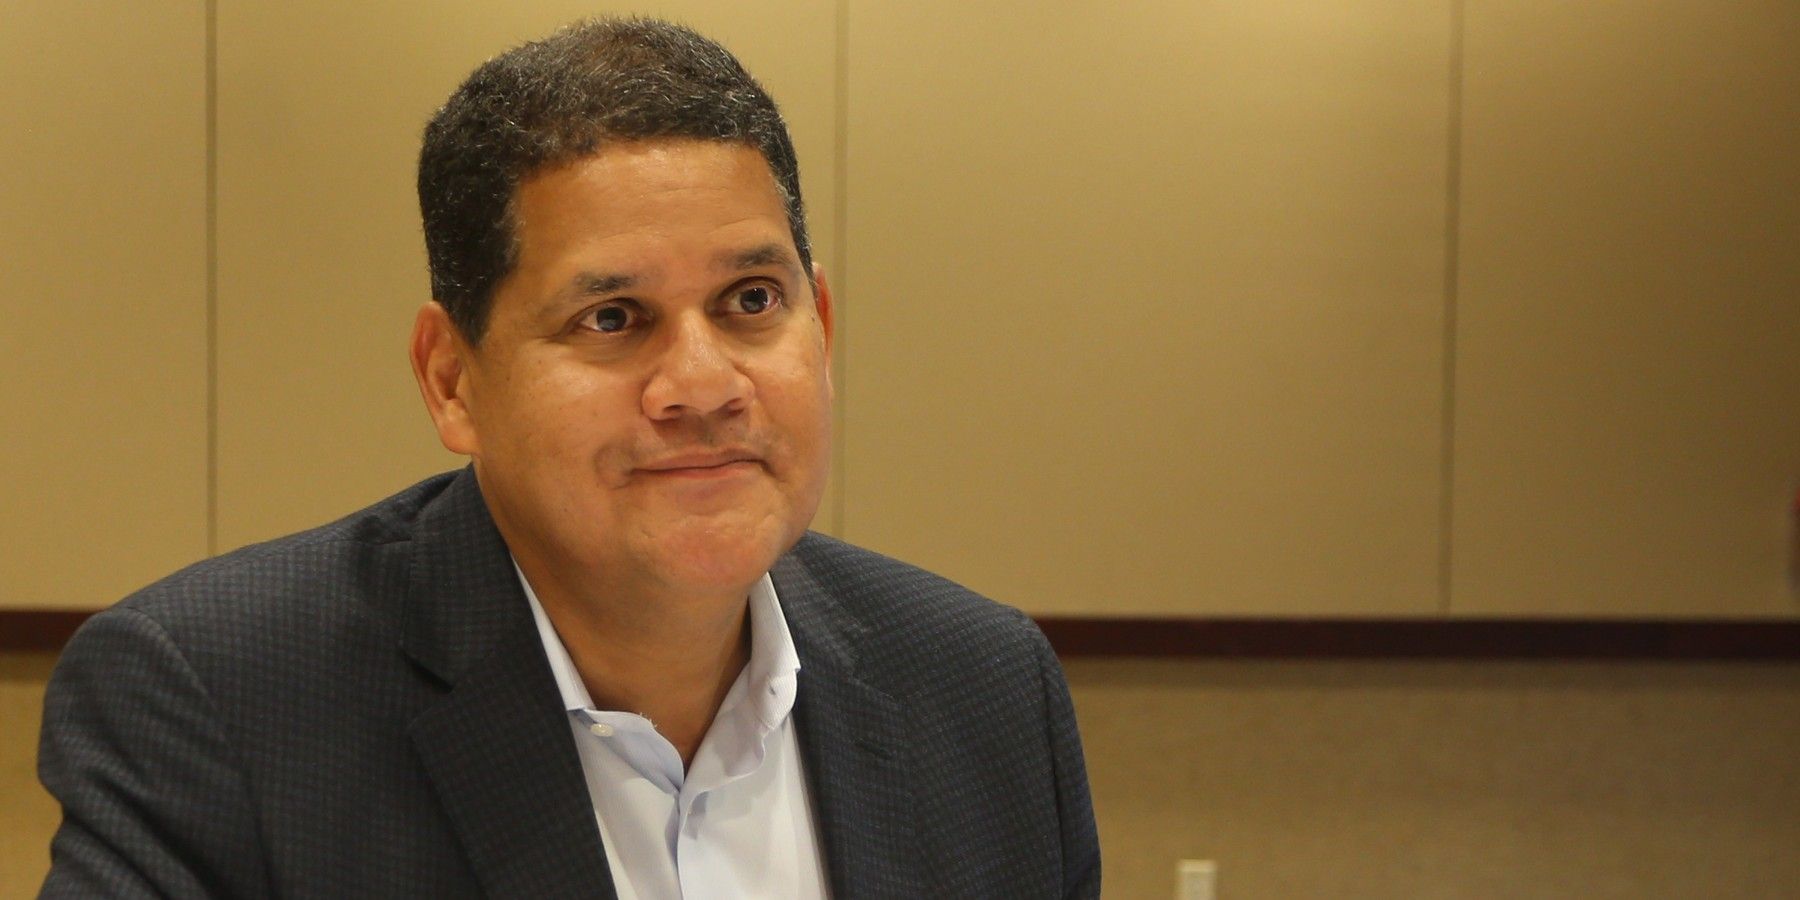 Voormalig Nintendo of America-president Reggie Fils-Aime is enthousiast over Grand Theft Auto 6